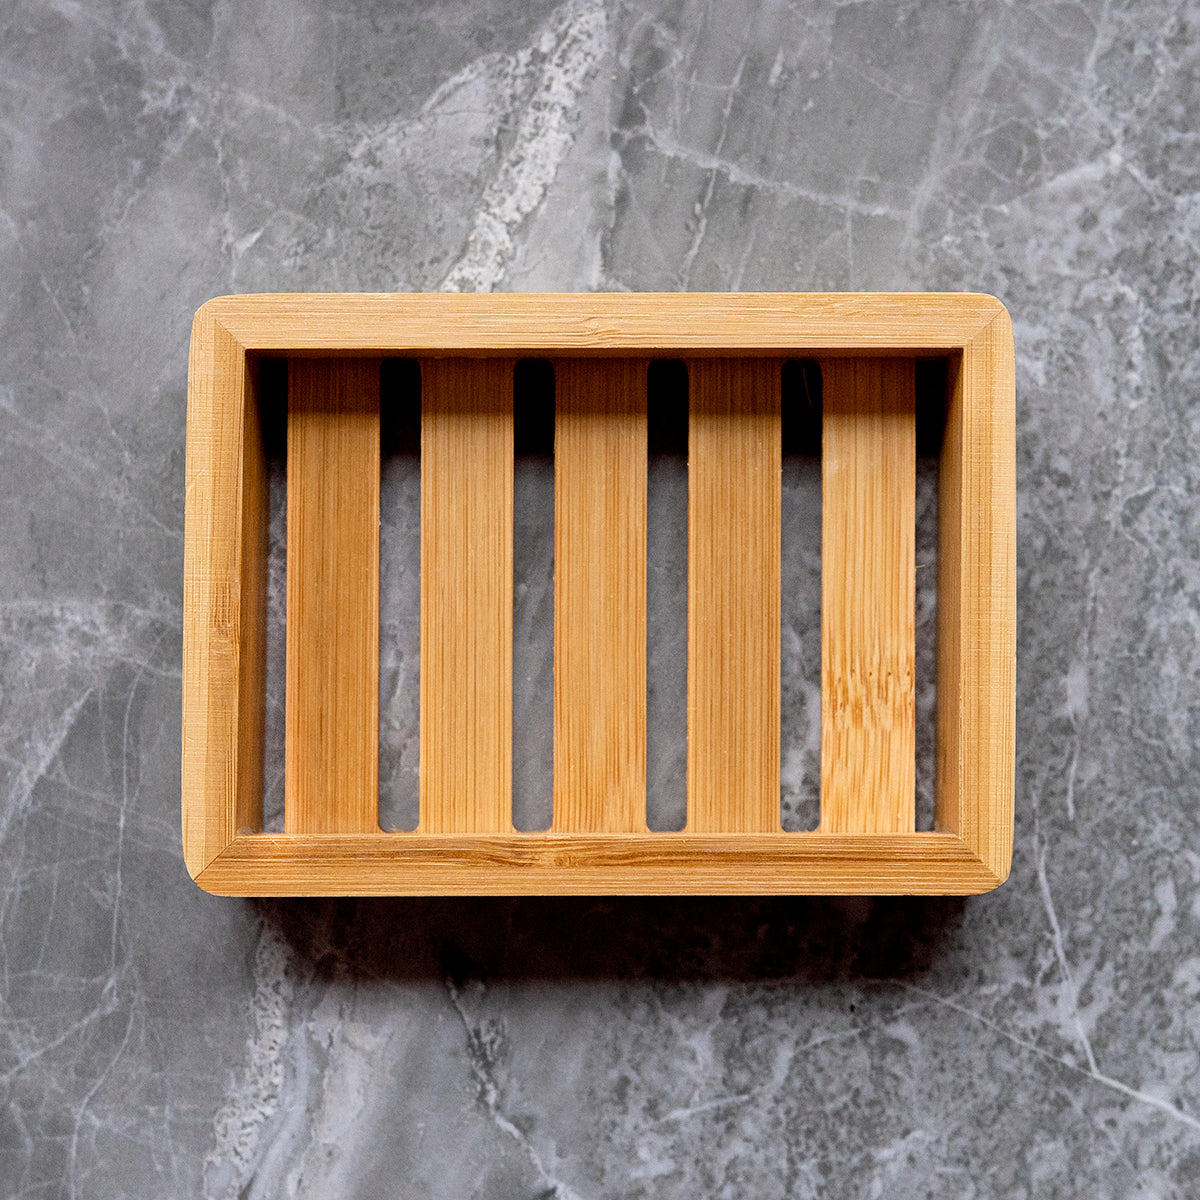 bamboo soap dish on grey marble surface